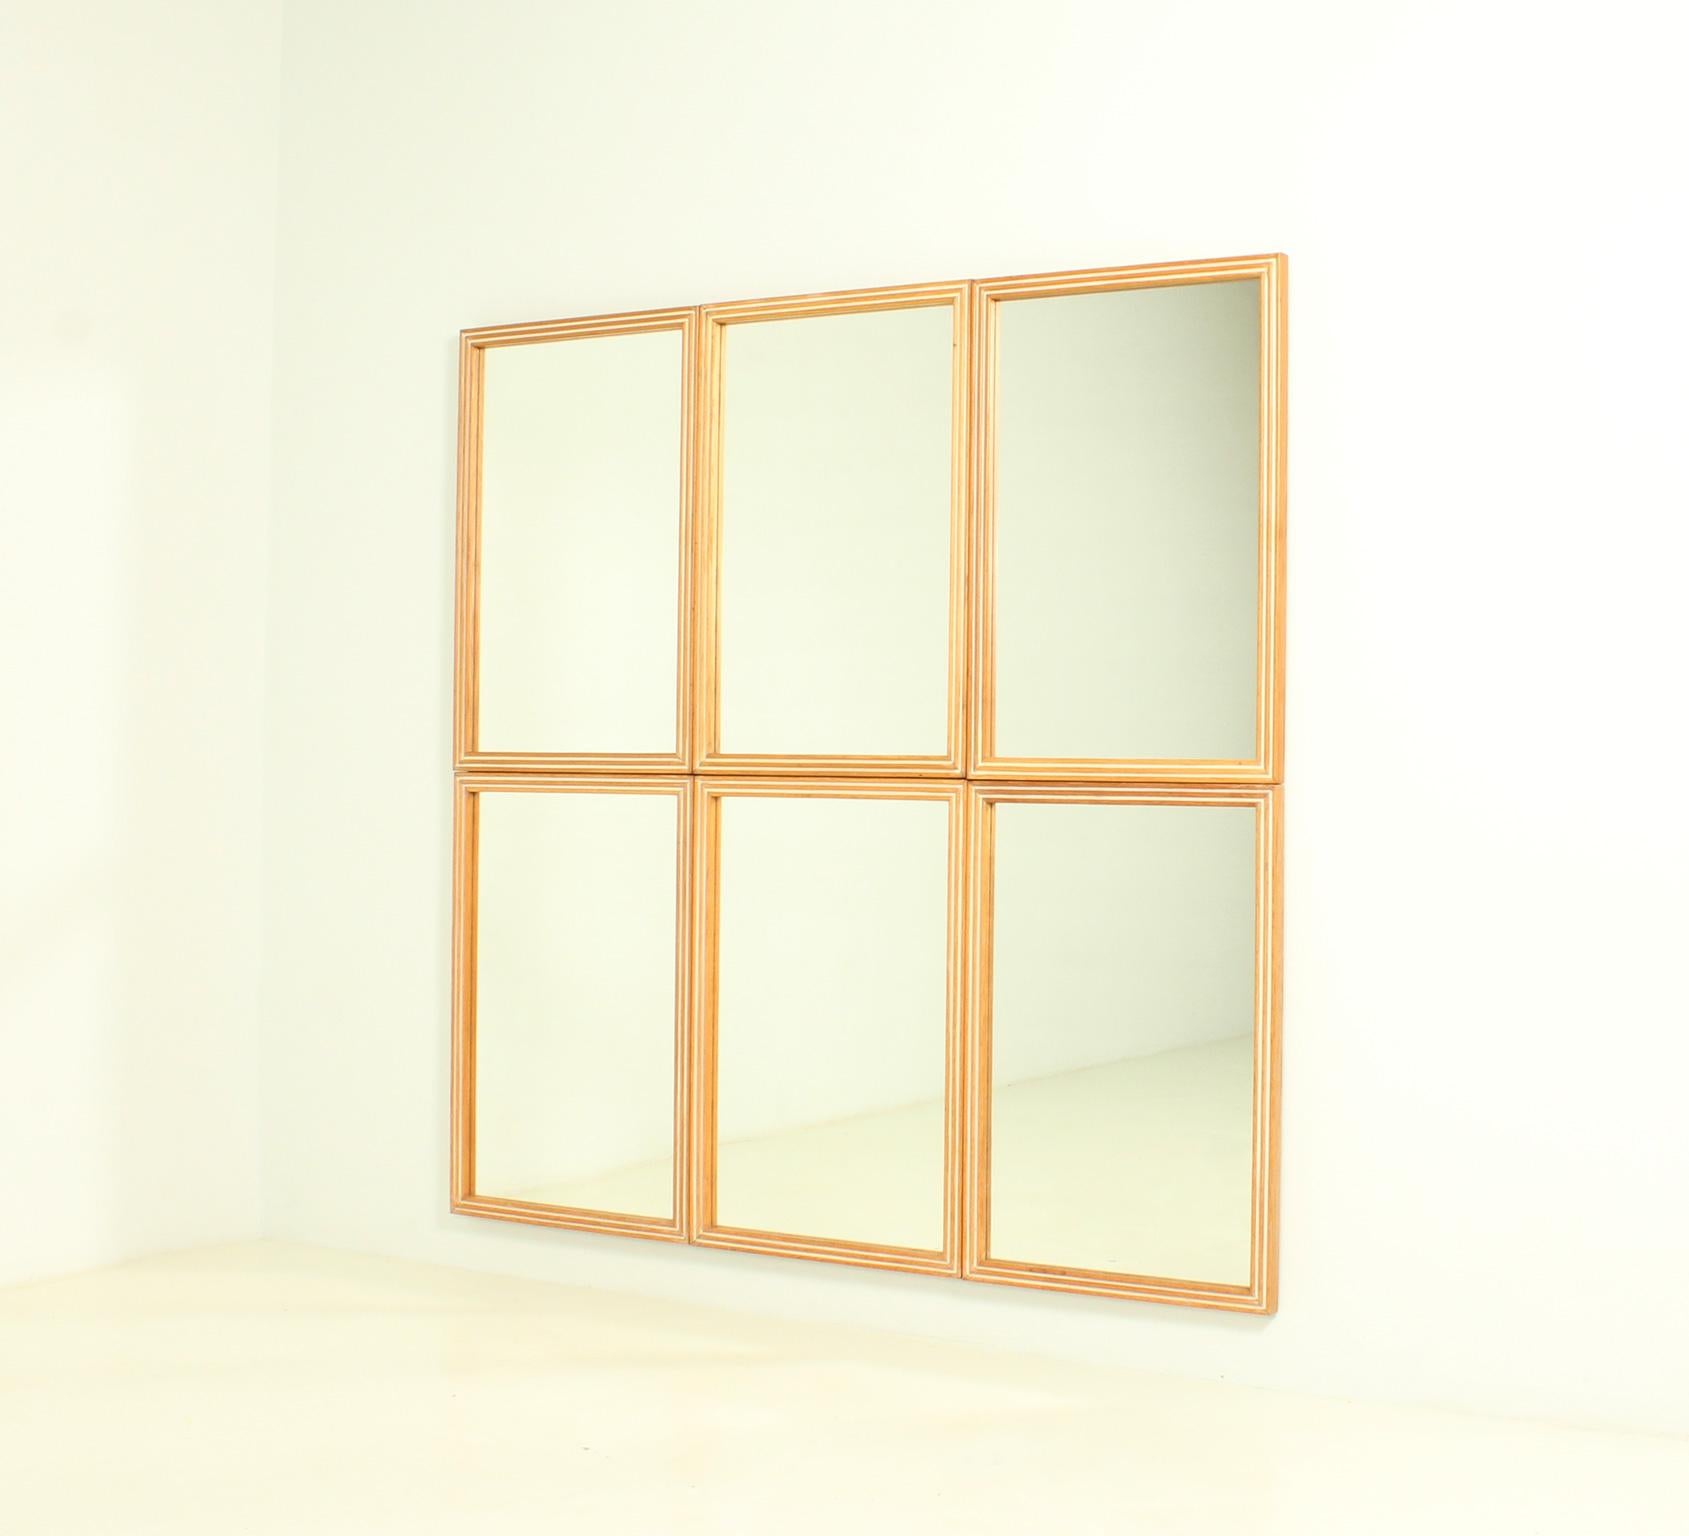 Set of six wooden wall mirrors from 1950's, Spain. Natural oak and cerused frame with mirror glass. They can be used separately or by making a composition like this.

Each mirror measures 60 W. x 4,5 D. x 90 H. cm.